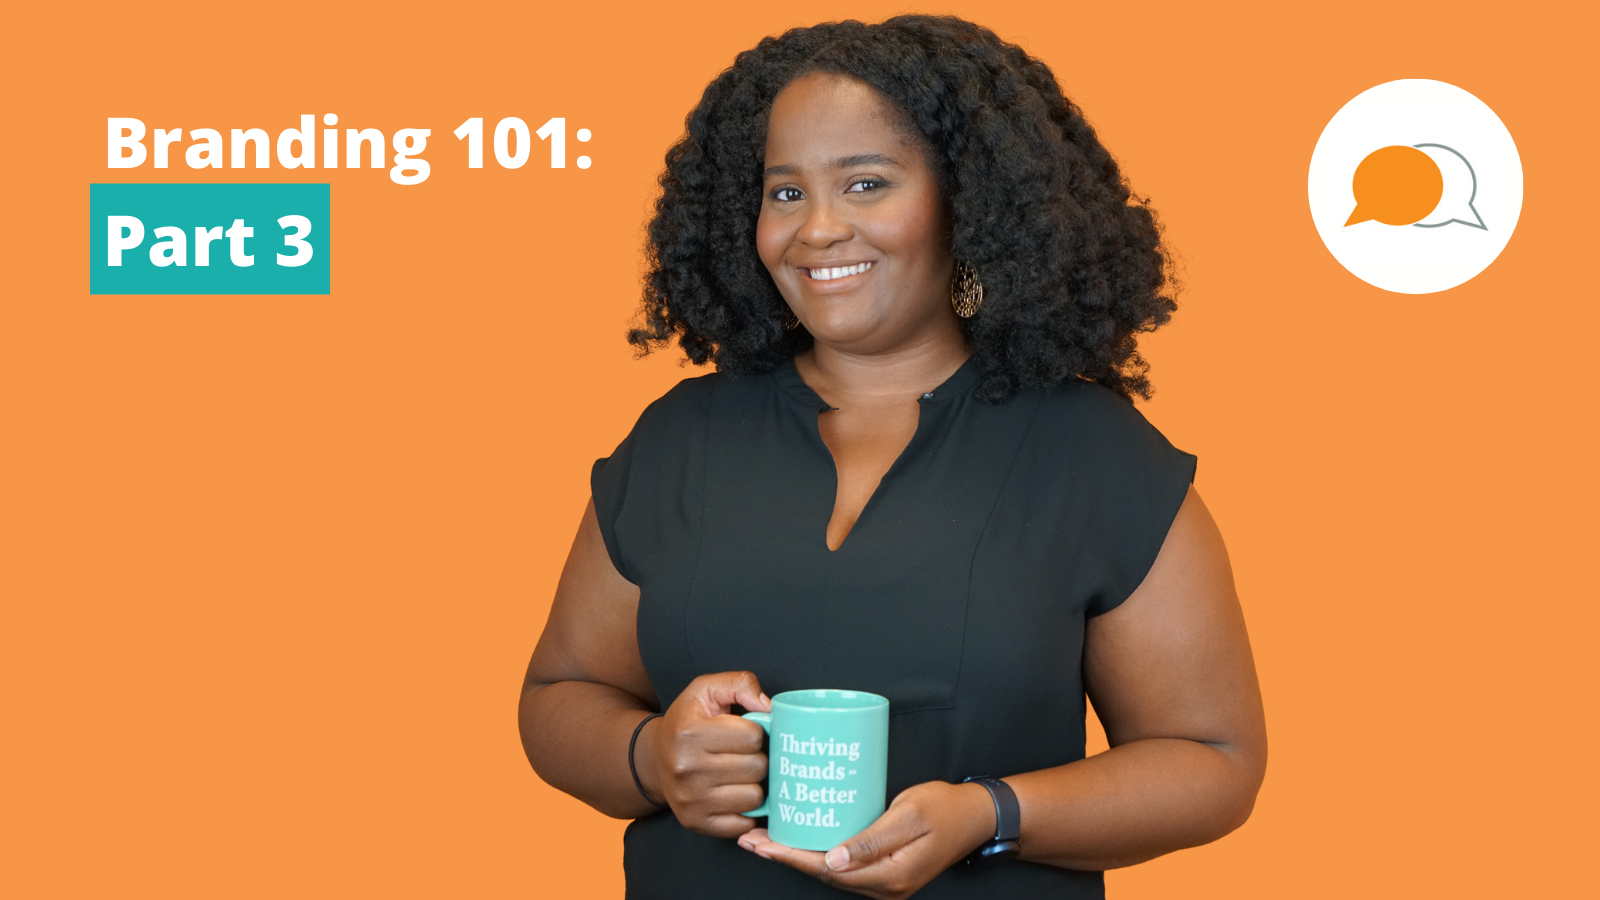 Branding 101: 10 Helpful Tips for Creating a New Brand